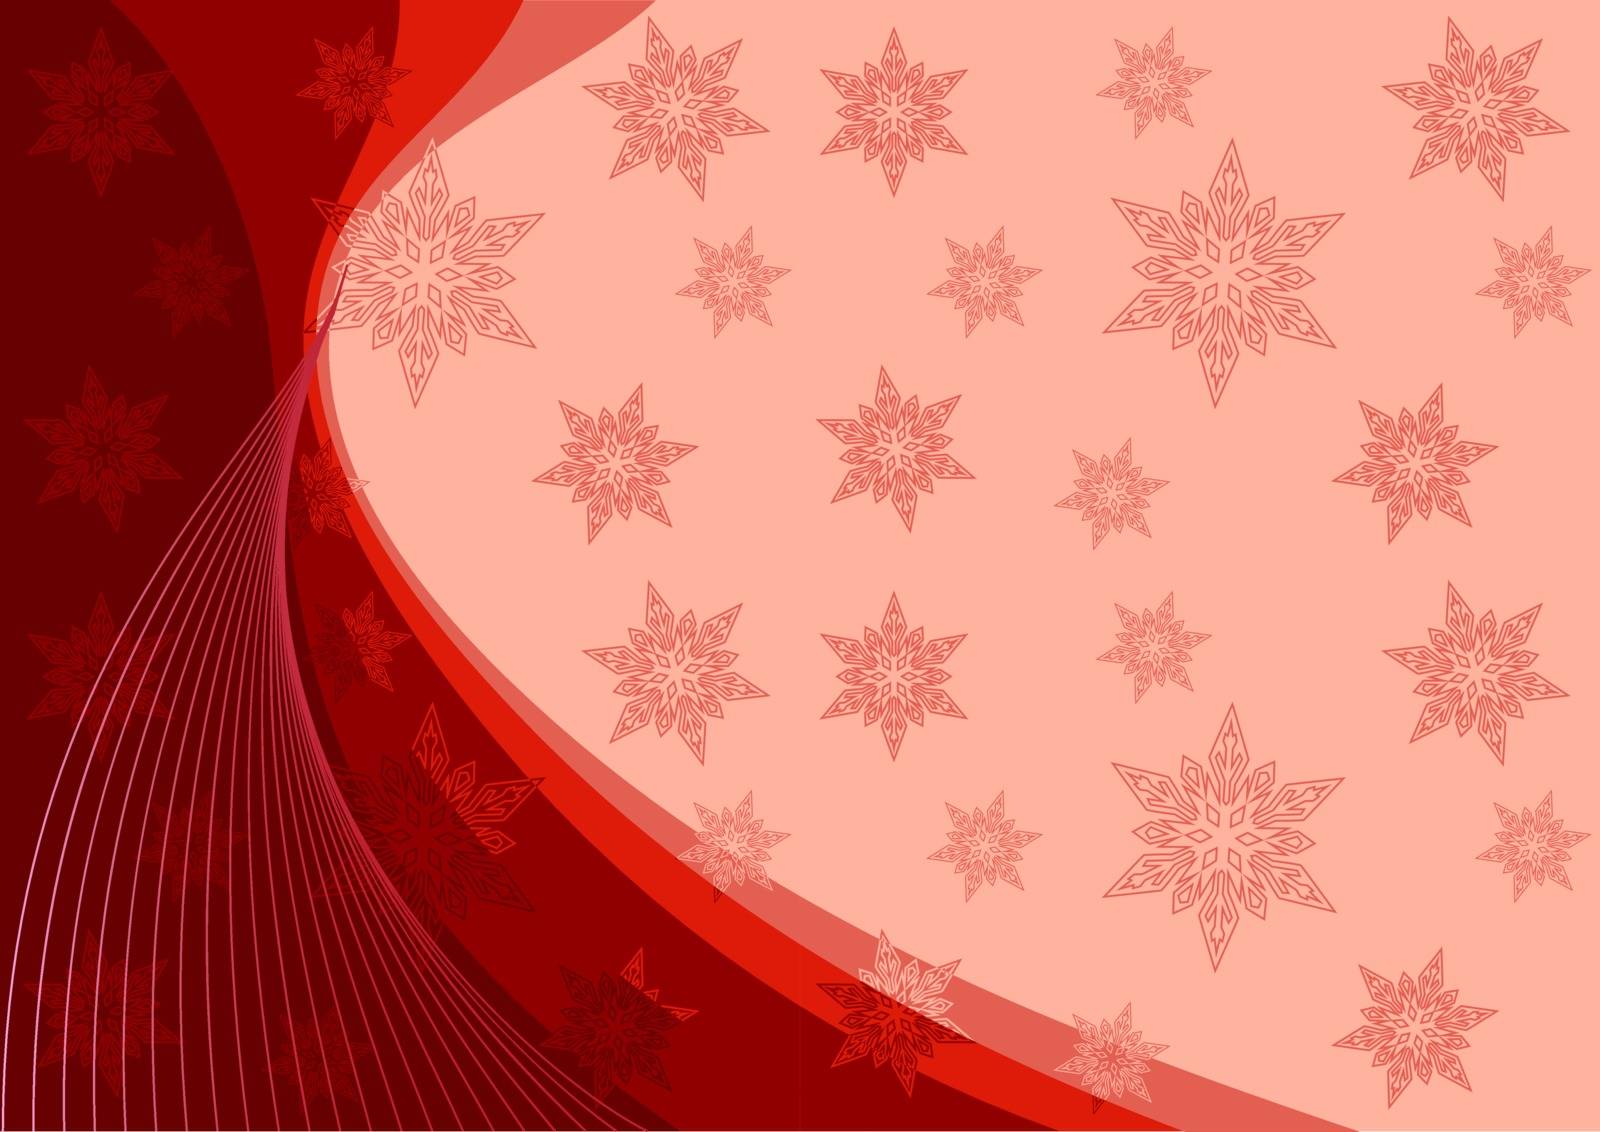 Greeting card for Christmas and New Year with snowflakes and place for text